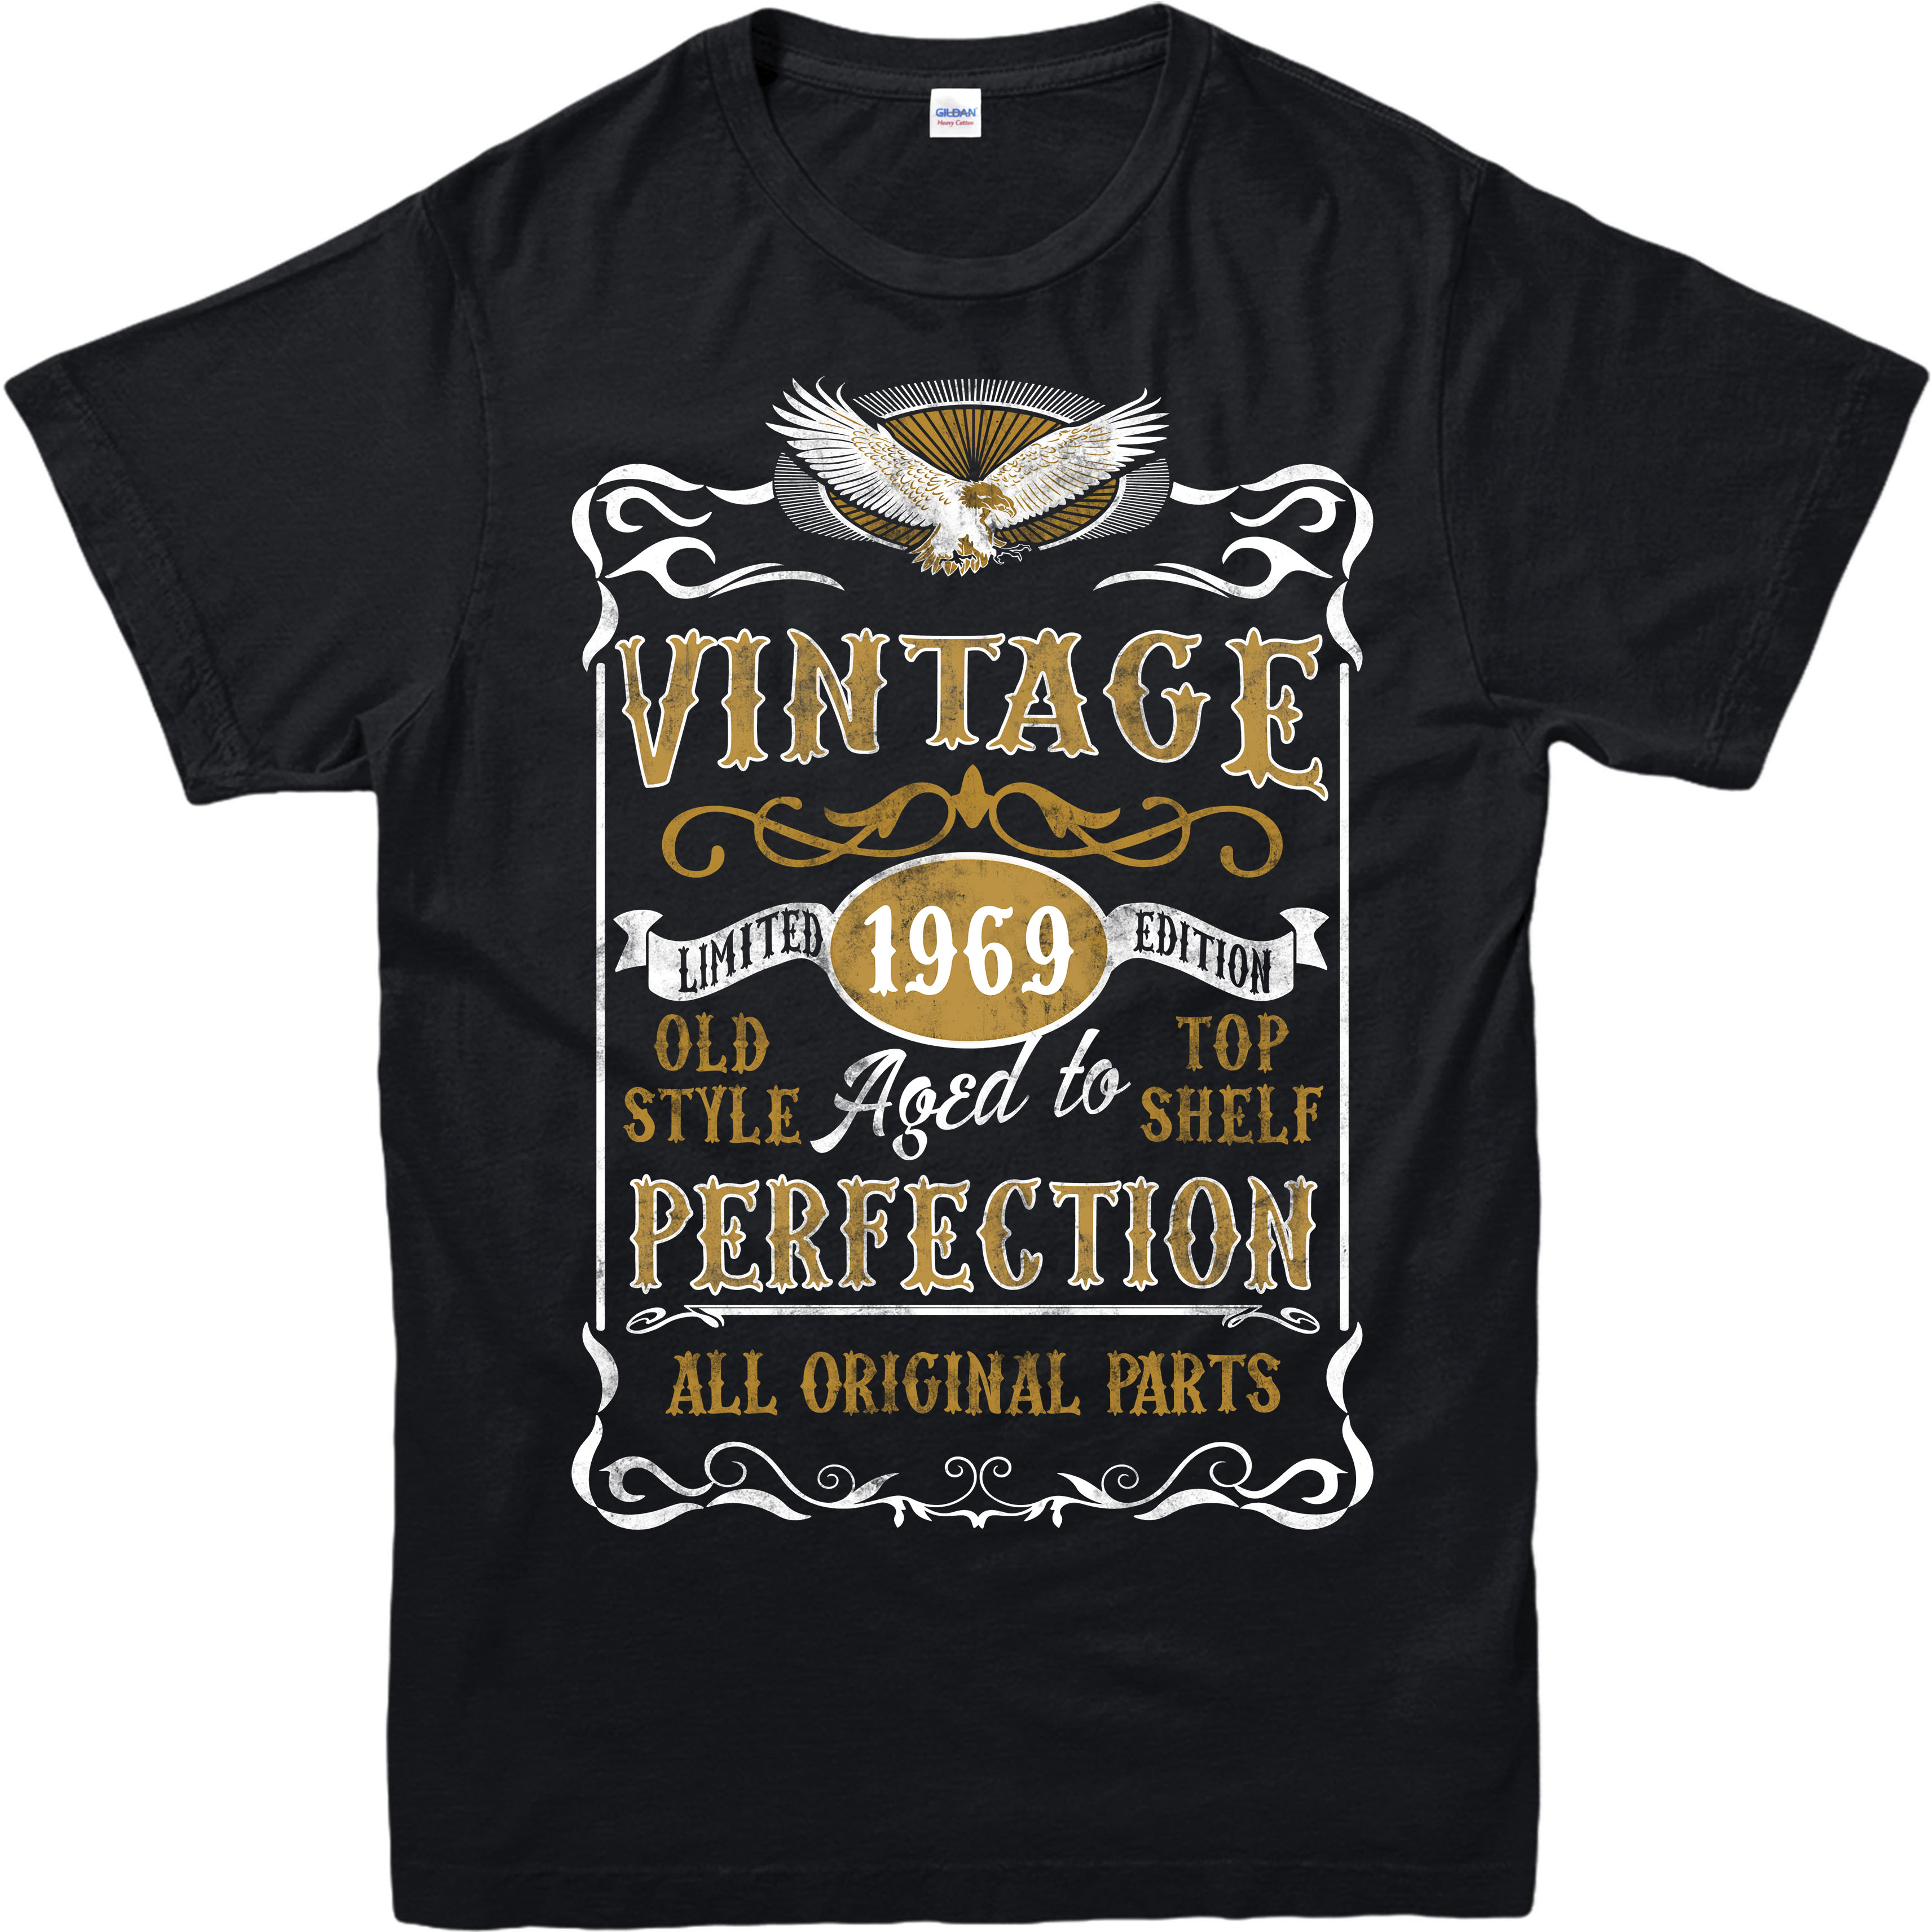 Made in 1969 Vintage T-Shirt, Born 1969 Birthday Age Year Gift Top | eBay